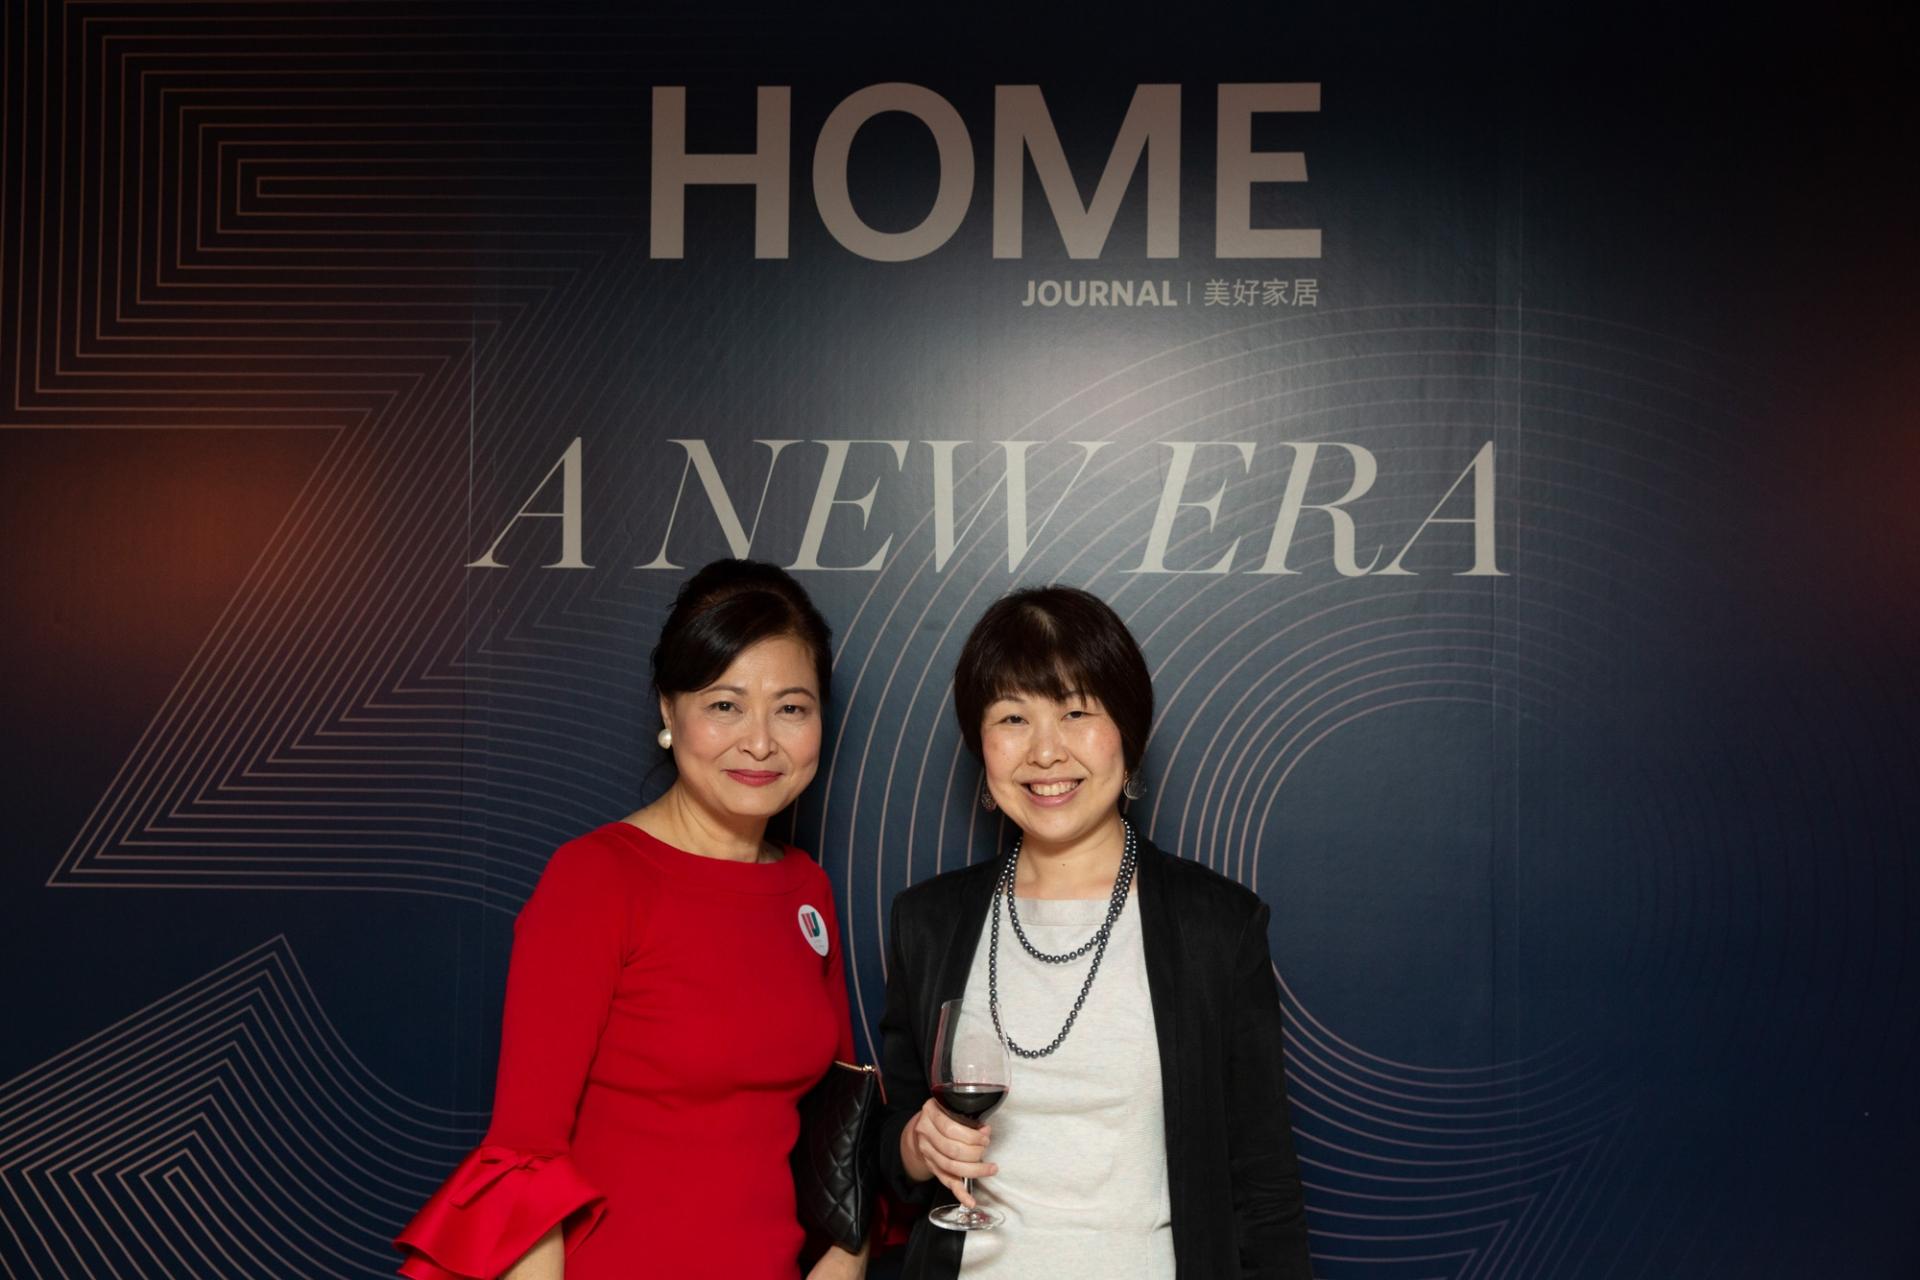 Exclusive: A Look Inside Home Journal’s Dazzling 39th Anniversary Party